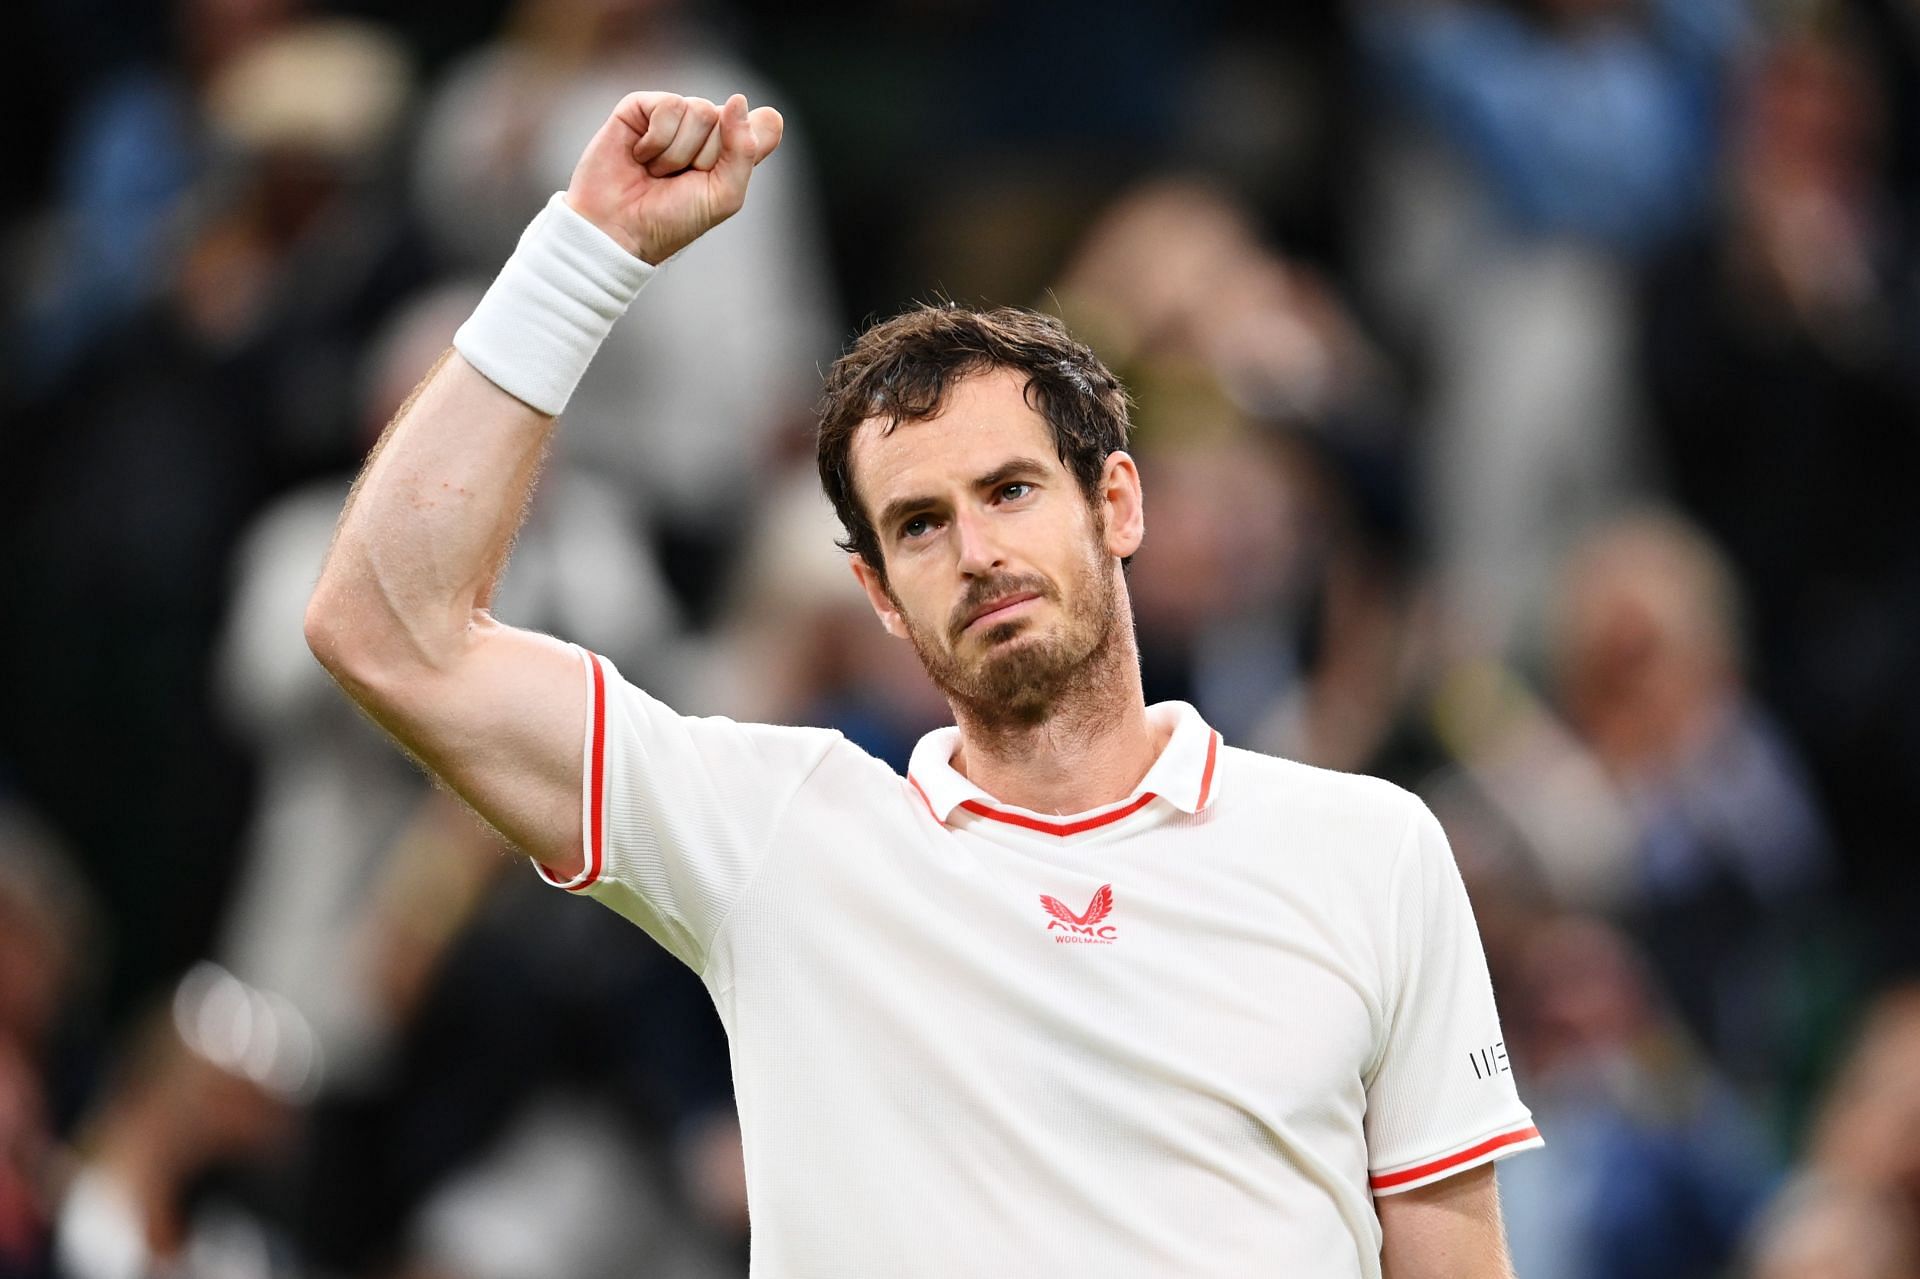 Andy Murray is thwe latest person to complete the double.